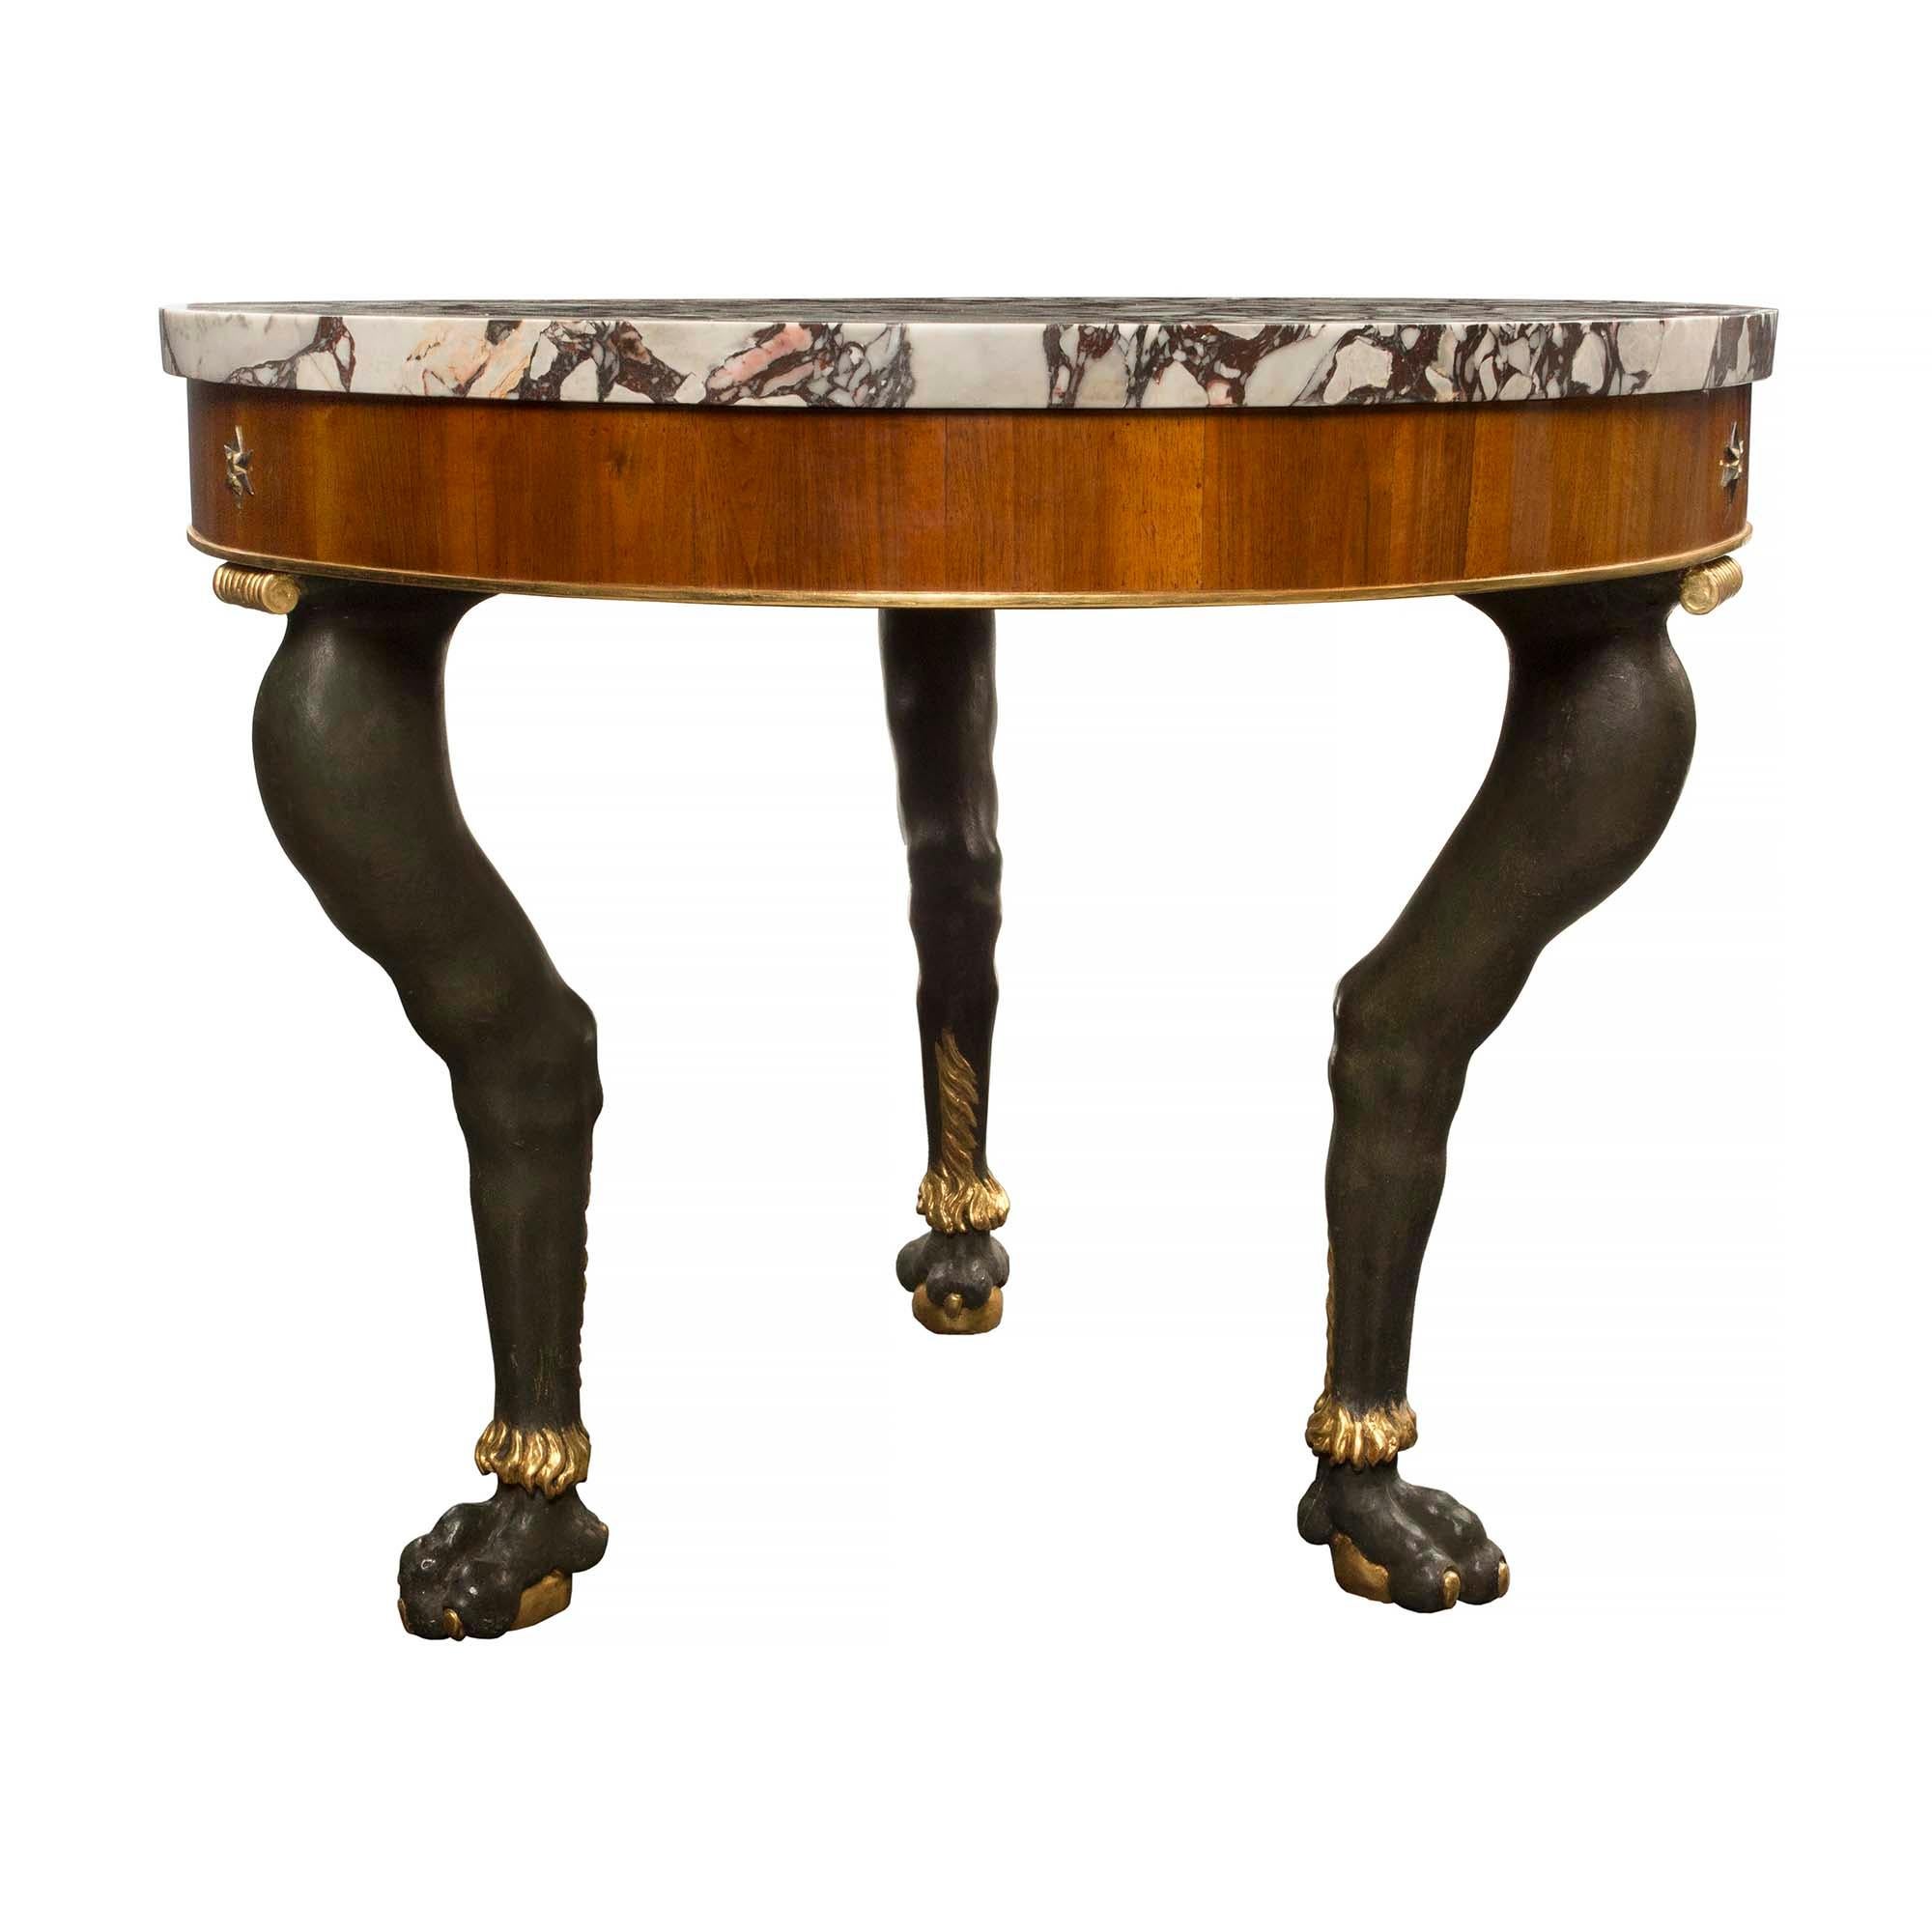 Neoclassical Italian 19th Century Neo Classical Walnut, Giltwood and Marble Center Table For Sale